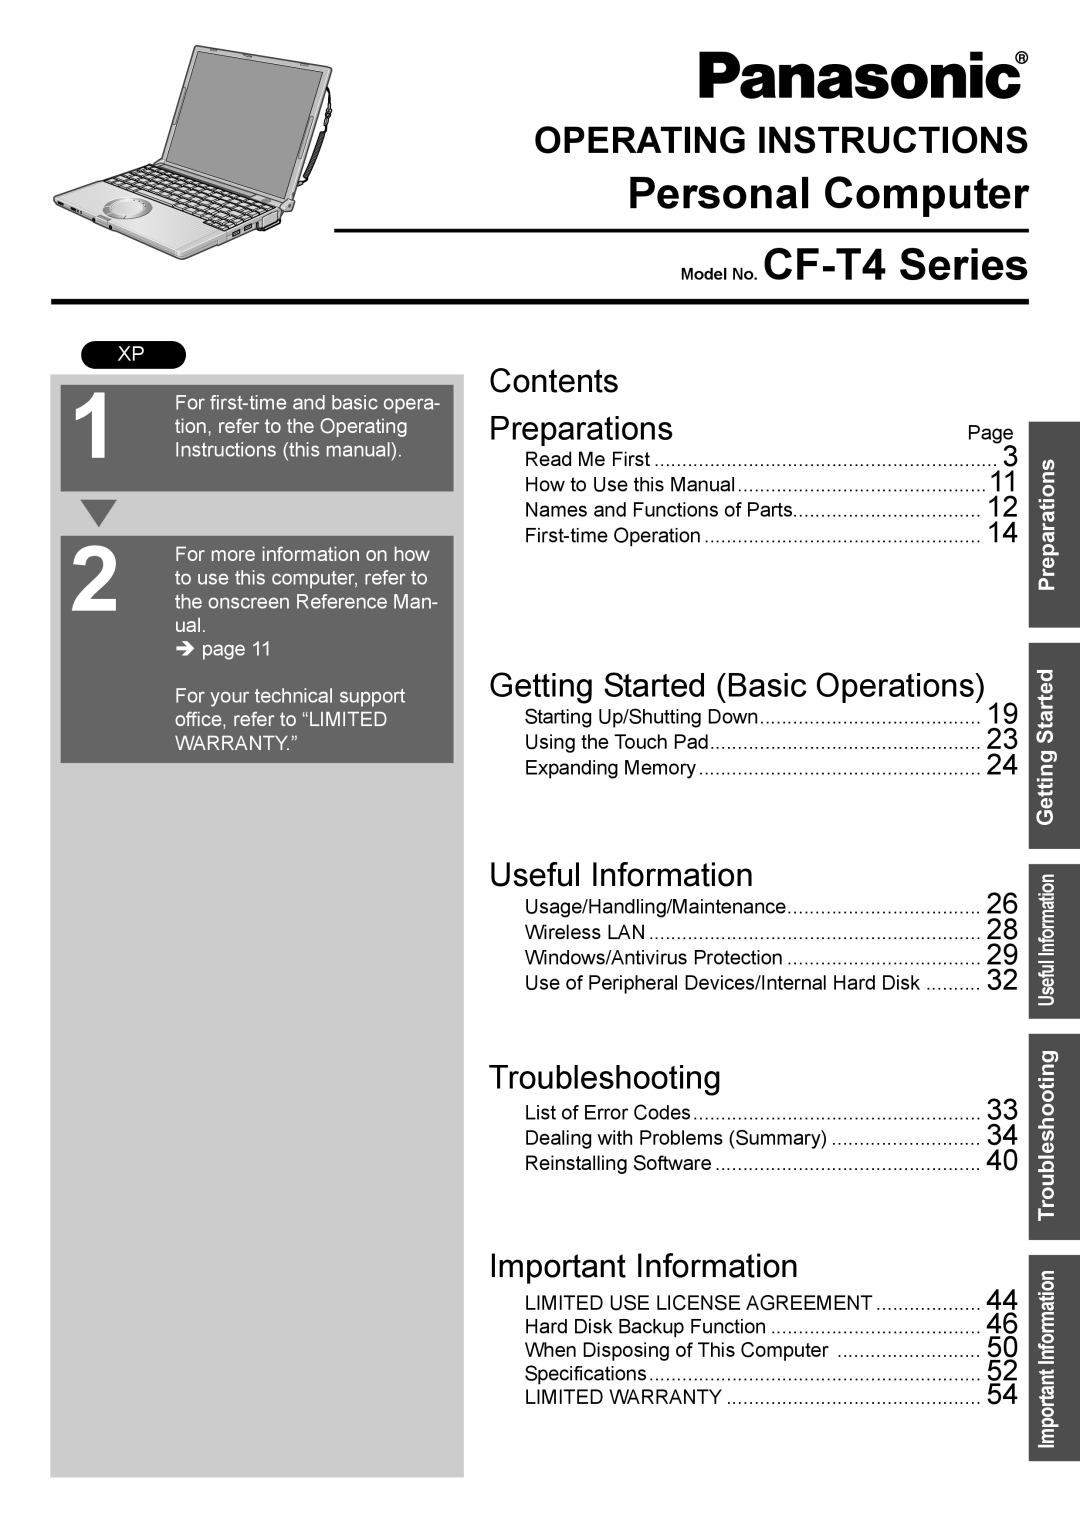 Panasonic operating instructions Started, Personal Computer Model No. CF-T4 Series, Operating Instructions, Contents 